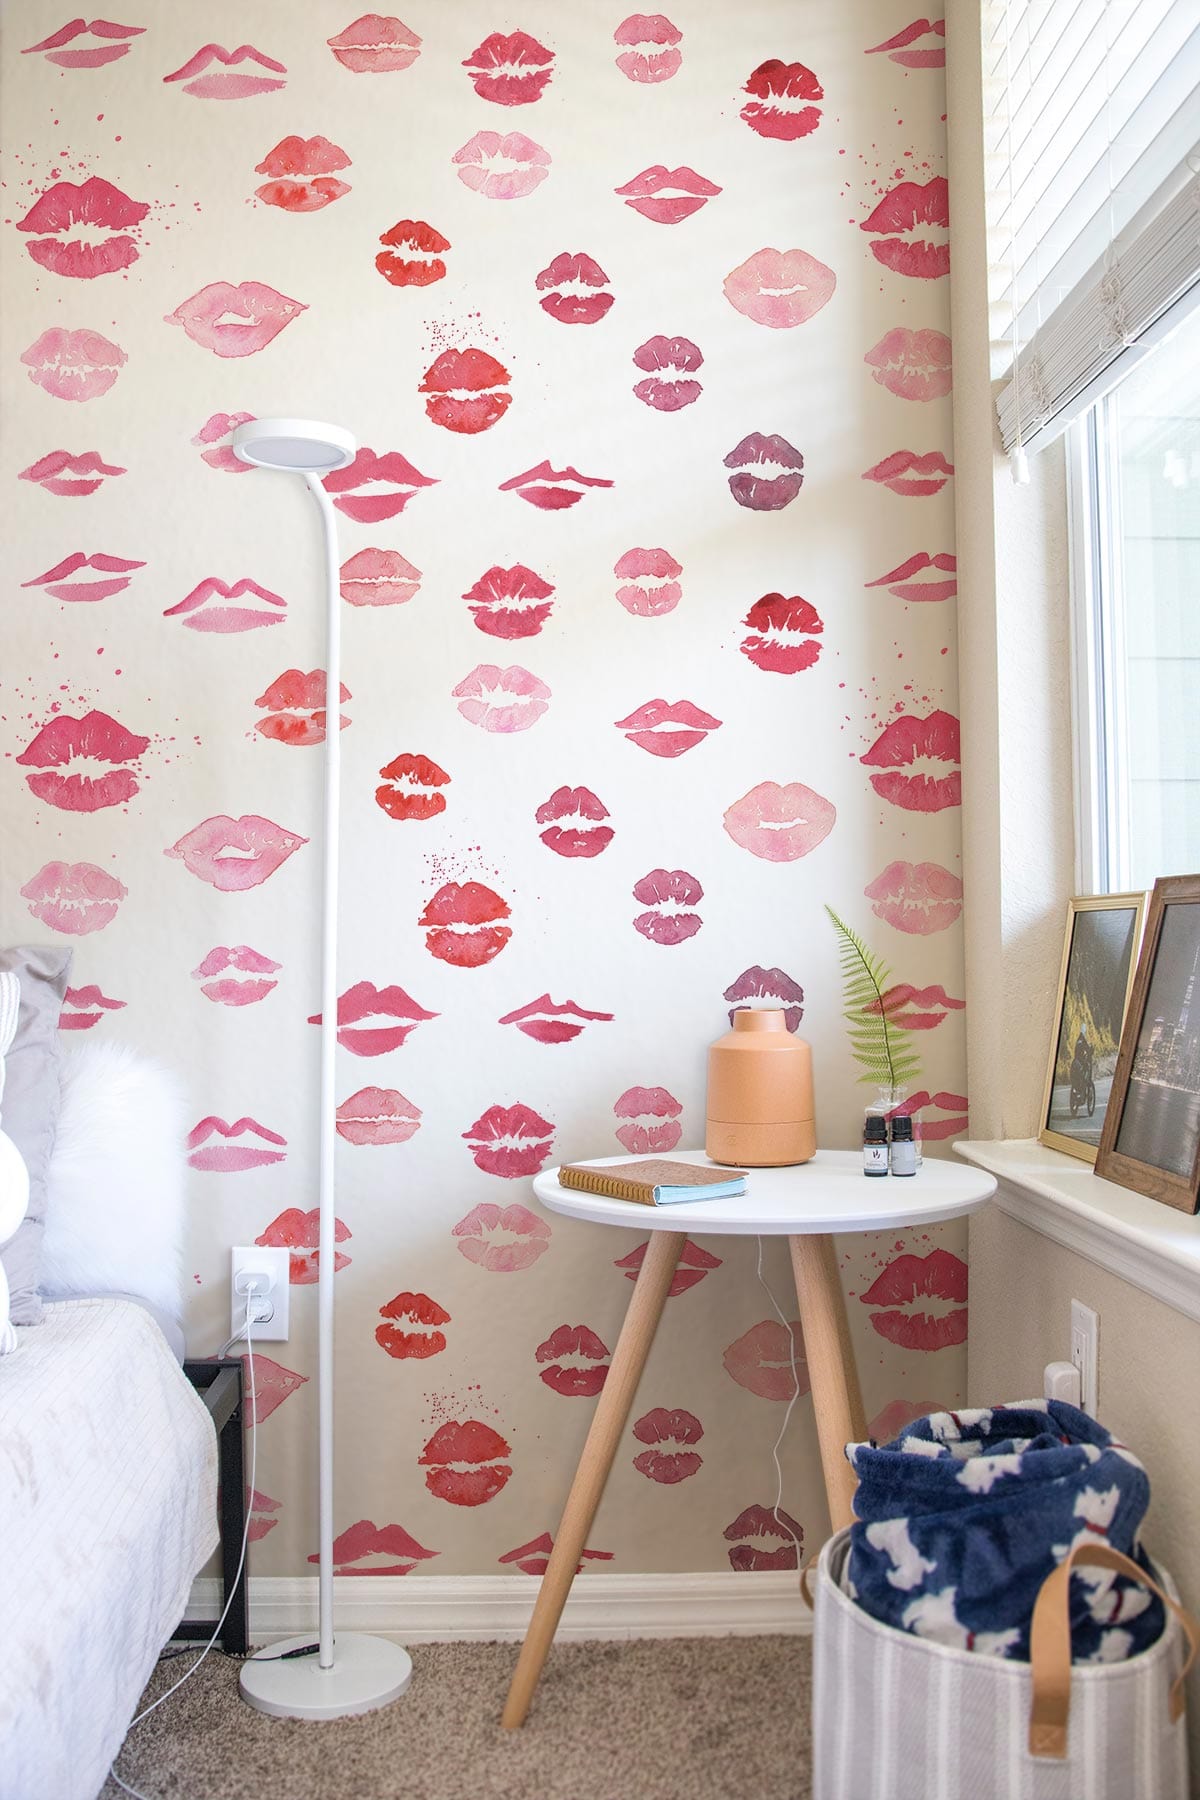 Lips repeated Pattern Wallpaper Mural for bedroom decor